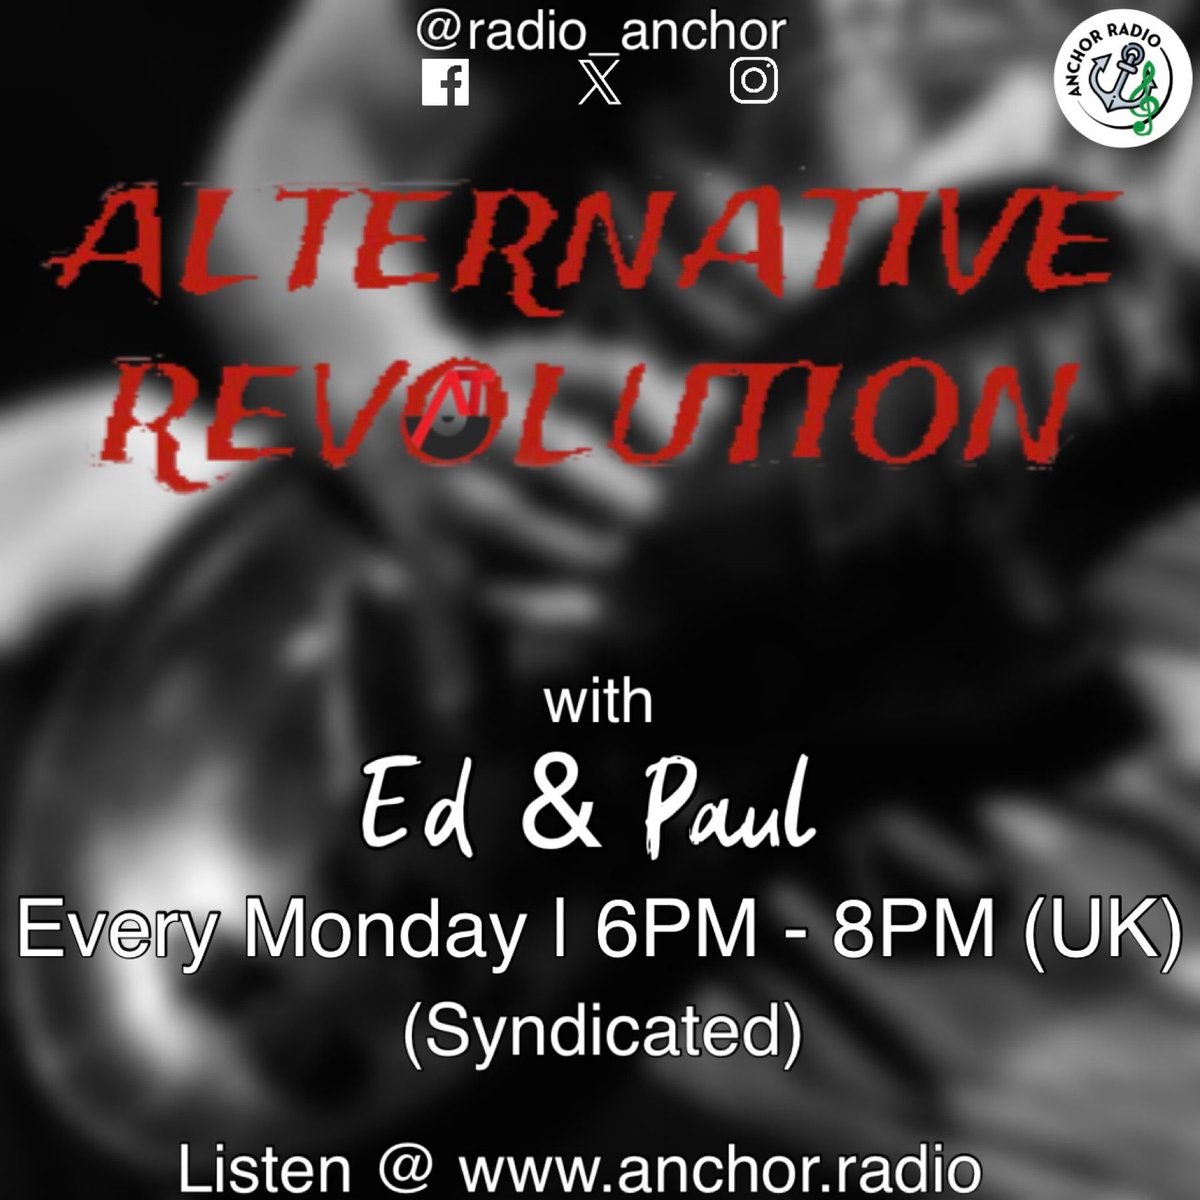 Alternative Revolution is live at 6pm tonight on anchor.radio. Usual banter between me & Ed, along with some of the best new releases, including tracks from @betterjoymusic, @thehowlersuk, @StDukes_, @25thhourbanduk @ChildSeatmusic #SCAPEGRACE #FASTBLOOD & many more